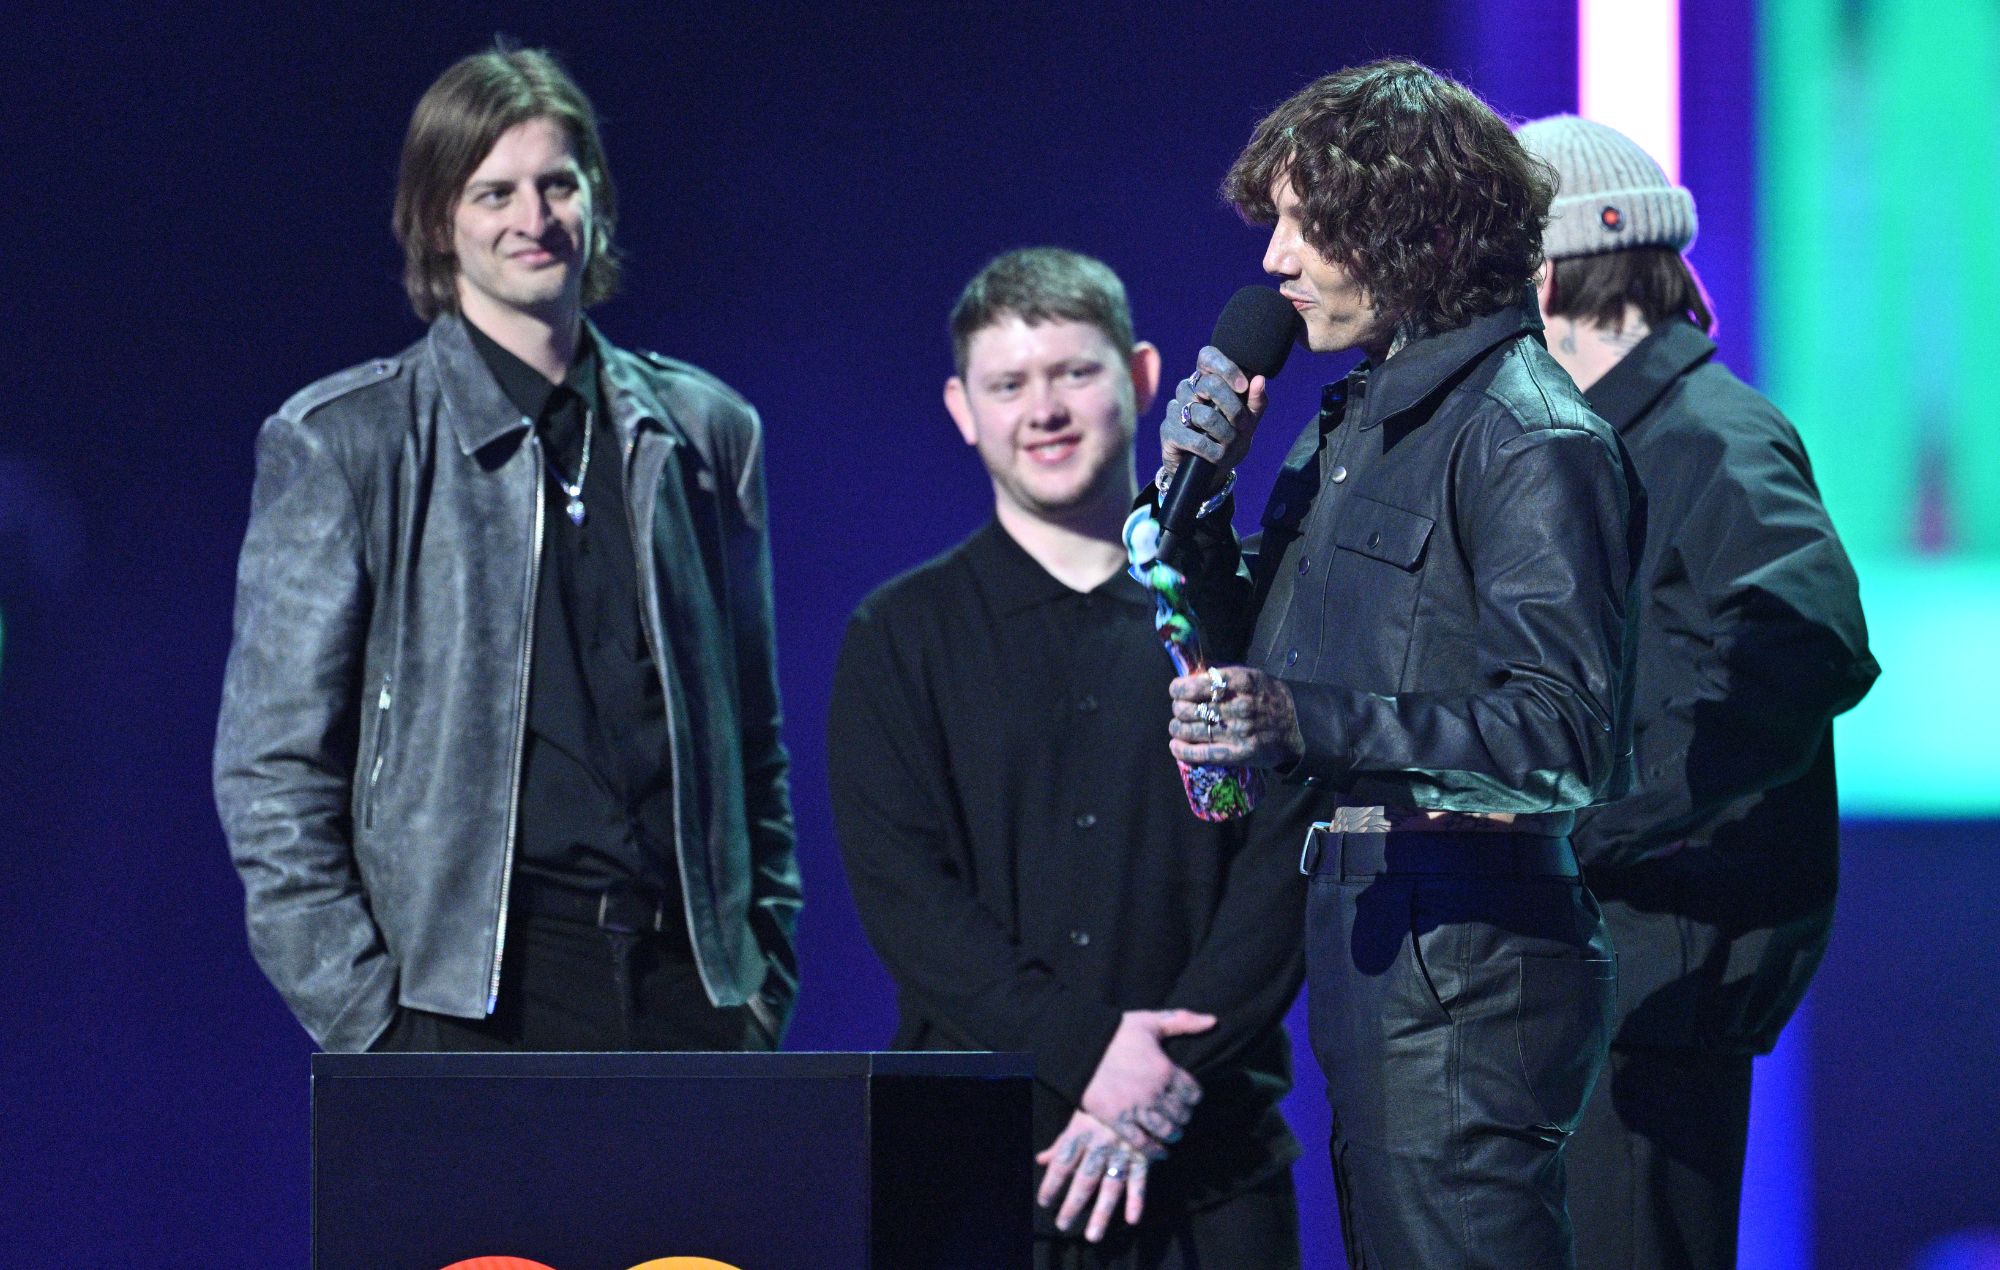 Matt Kean, Lee Malia, Oliver Sykes and Mat Nicholls the group Bring Me The Horizon wins the Best Alternative Rock act during the BRIT Awards 2024 at The O2 Arena on March 02, 2024 in London, England. 